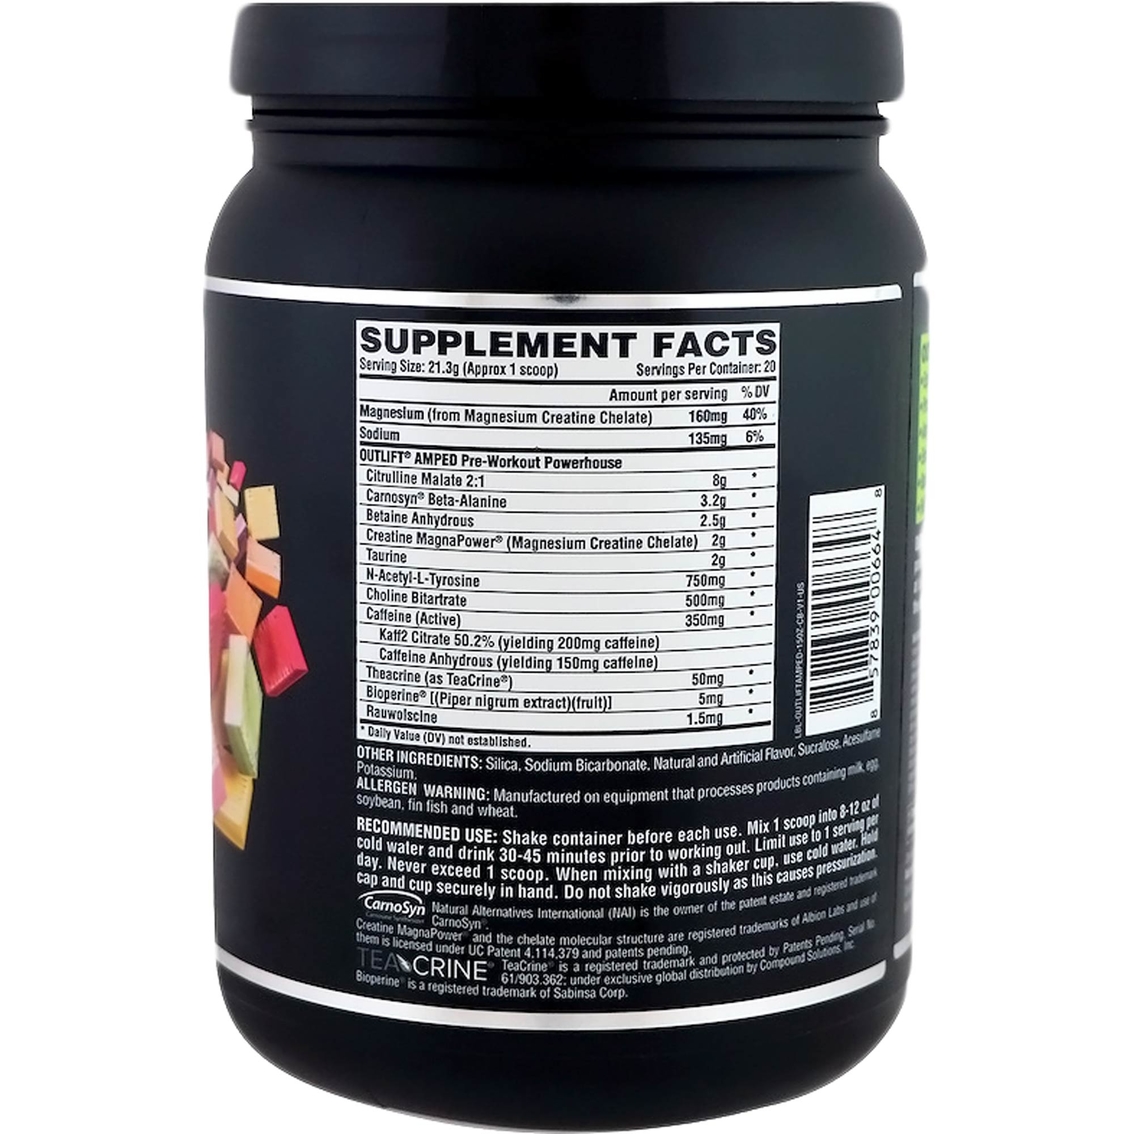 Nutrex Outlift Pre-Workout Supplement, 10 Servings - Image 2 of 2